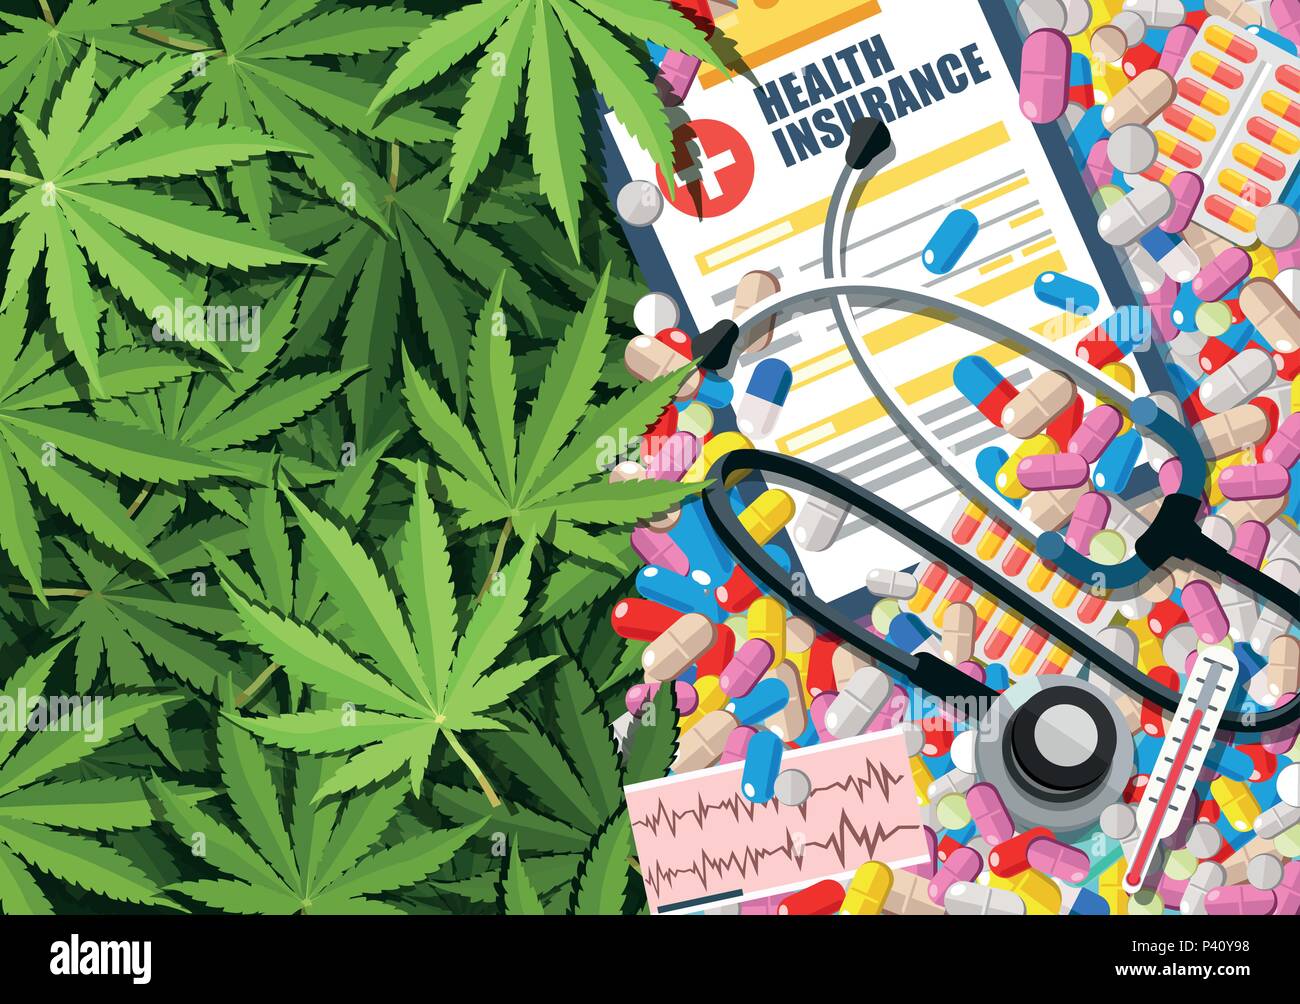 Marijuana medical use and health care concept. Traditional medicine versus other options with cannabis Stock Vector